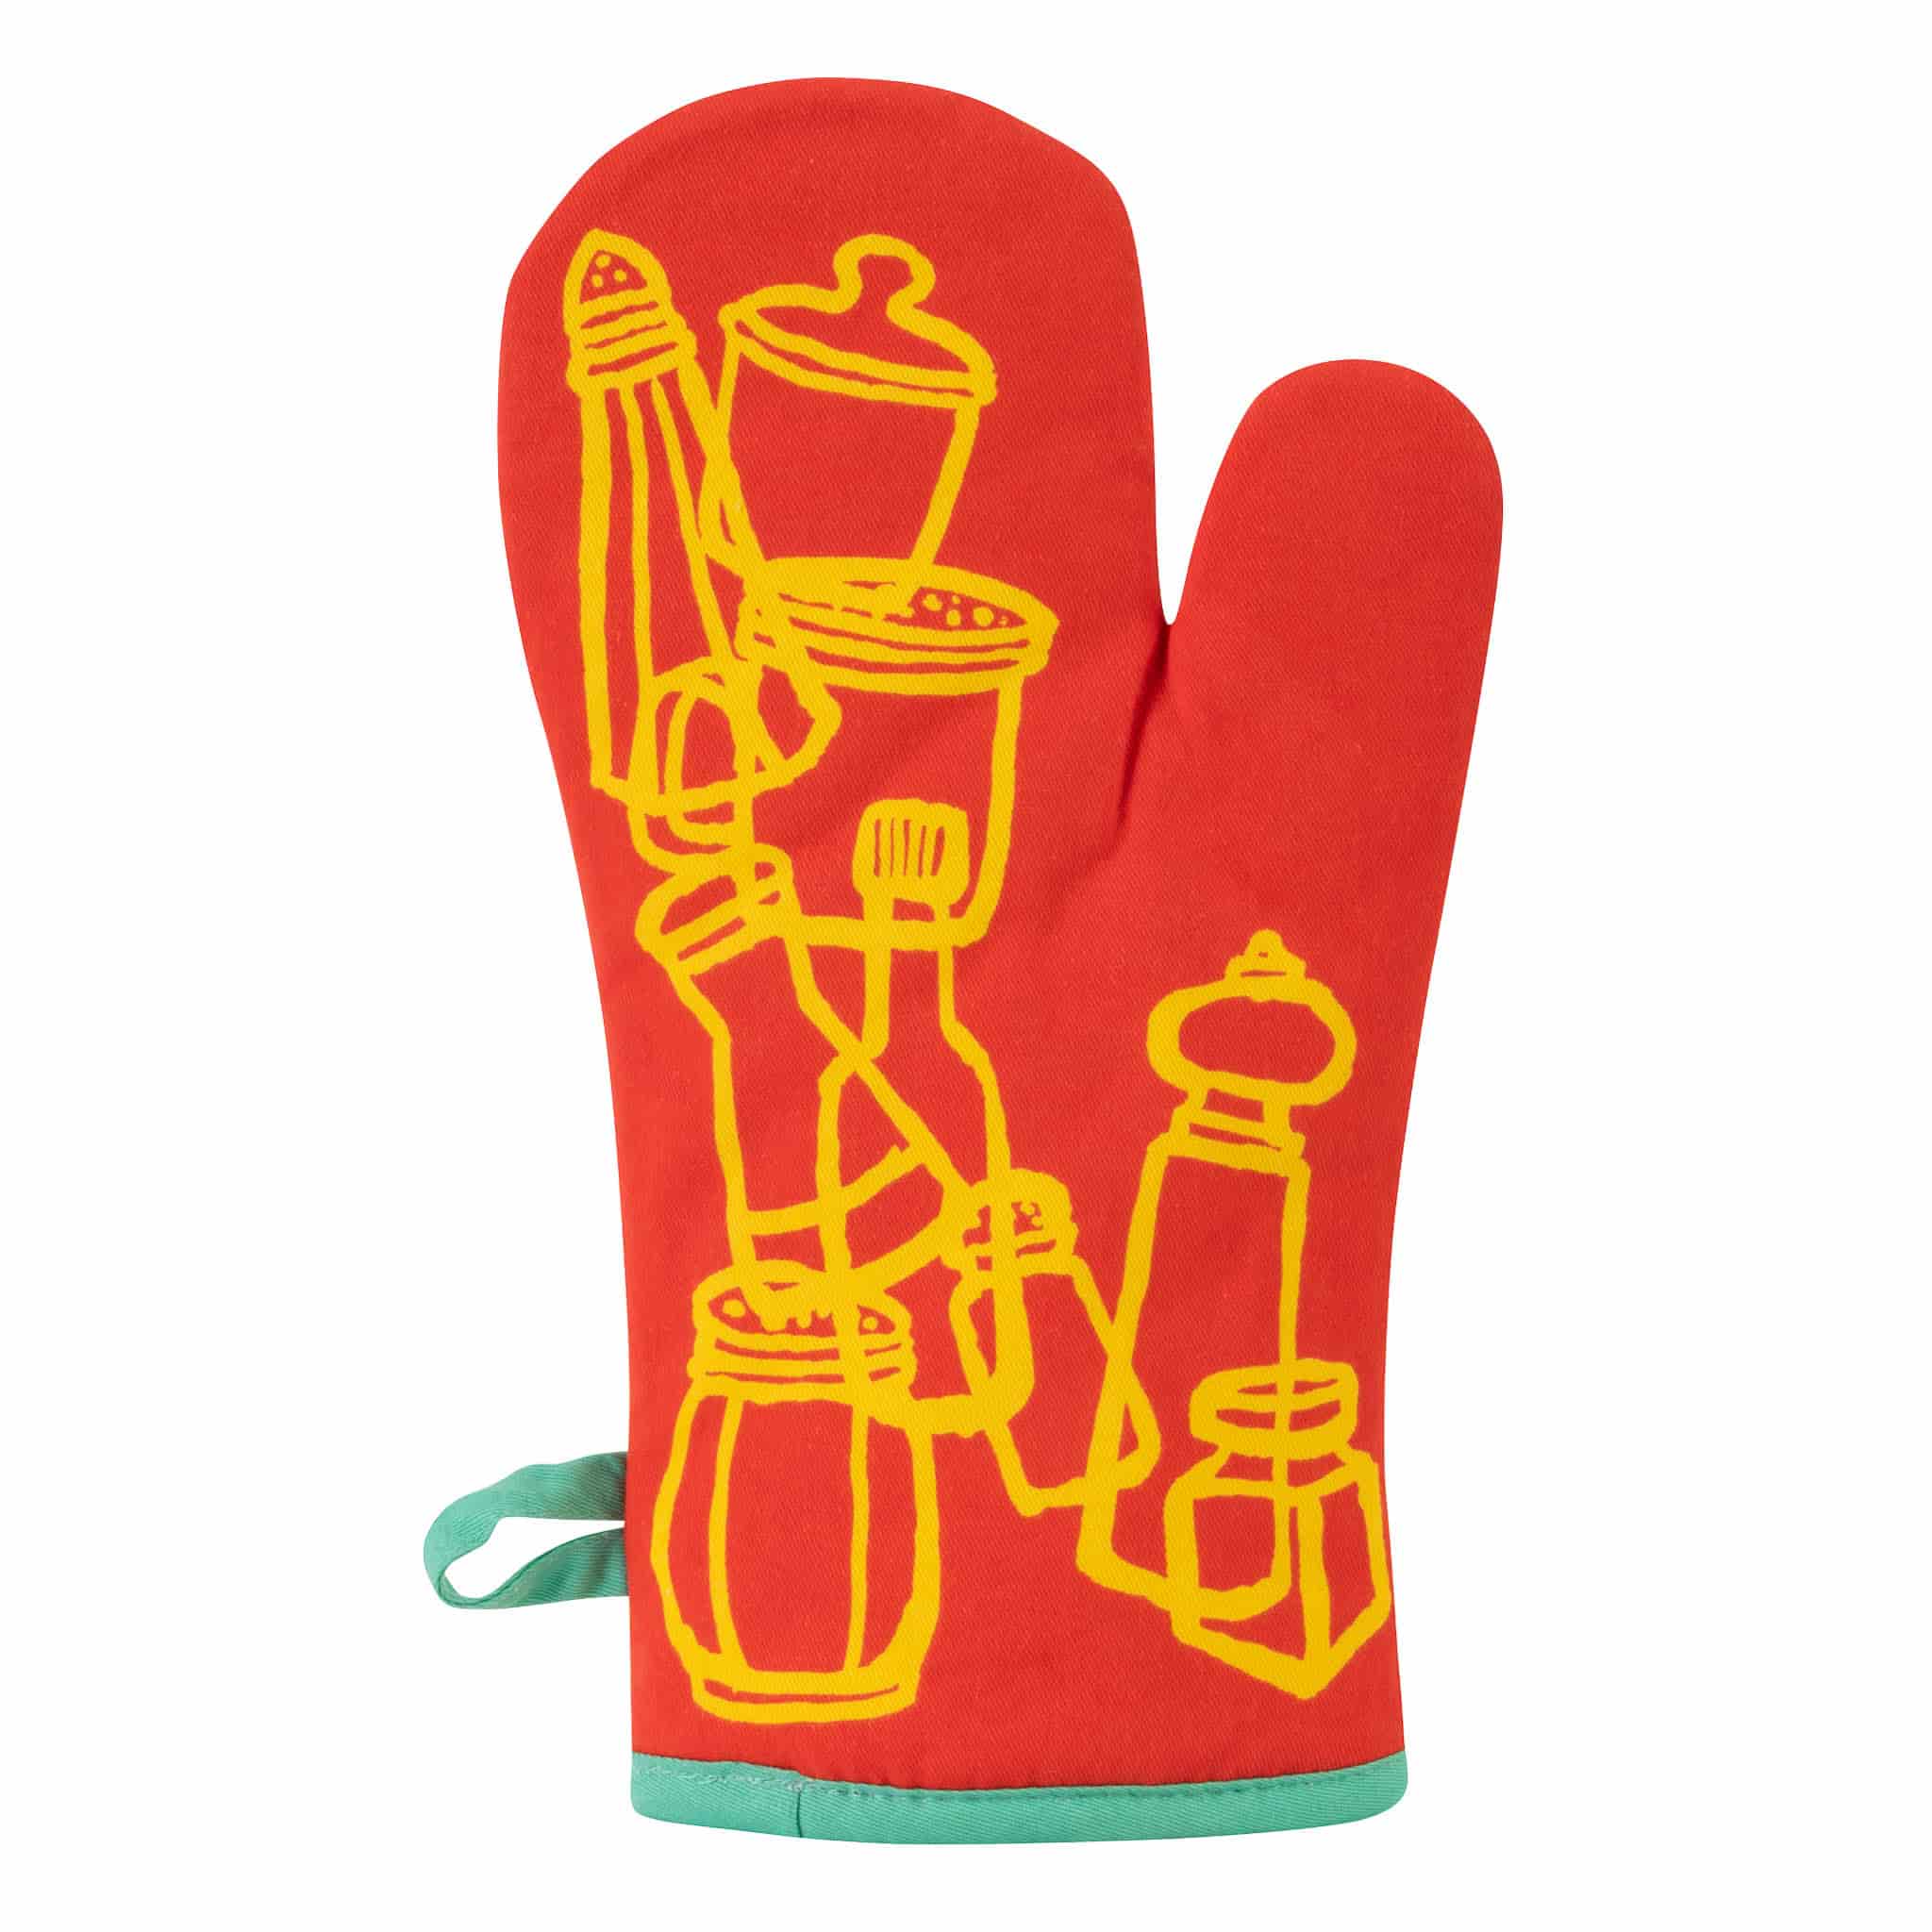 Mr. Spice Guy Double Sided Oven Mitt